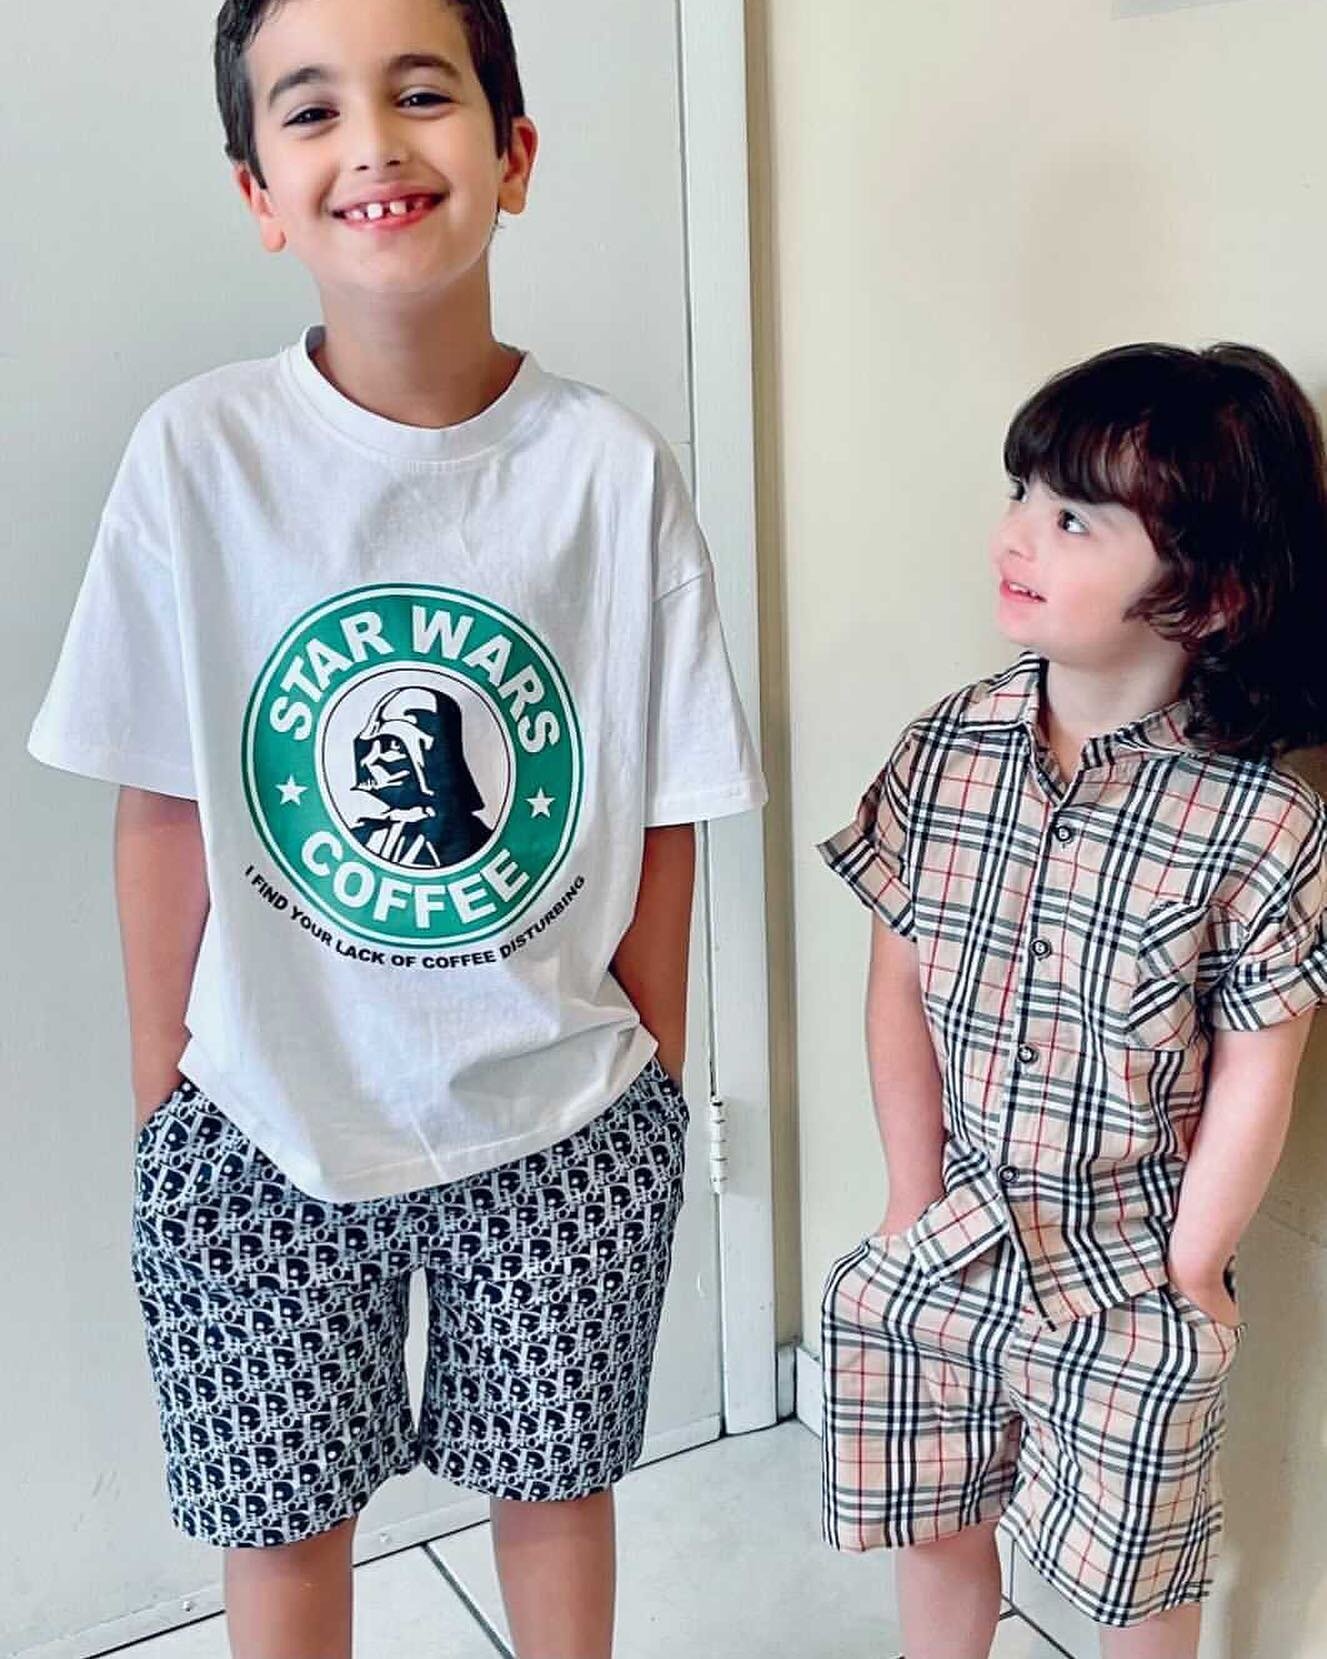 How cute are these siblings 😍😍 both fitted in BOSSYKIDZ CLOTHING 🙌🏻🙌🏻 
Ft our star wars tee and DD SHORTS 
And our &ldquo;I am who I am set &ldquo; 
All items online 😊 
Code BOSSY10  for $ off 
Www.Bossykidz.com